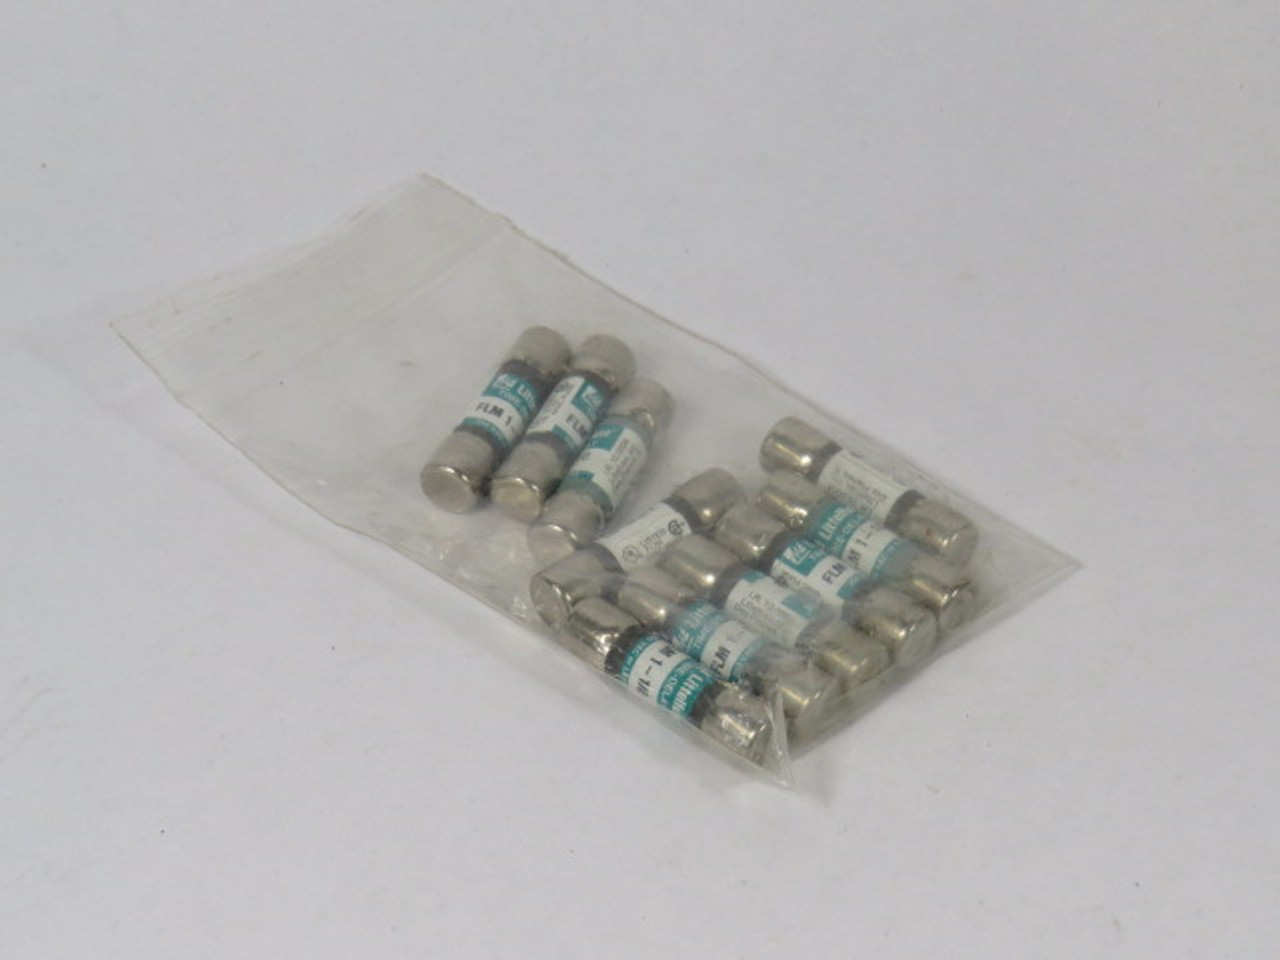 Littelfuse FLM-1-1/8 Time Delay Fuse 1-1/8A 250V Lot of 10 USED